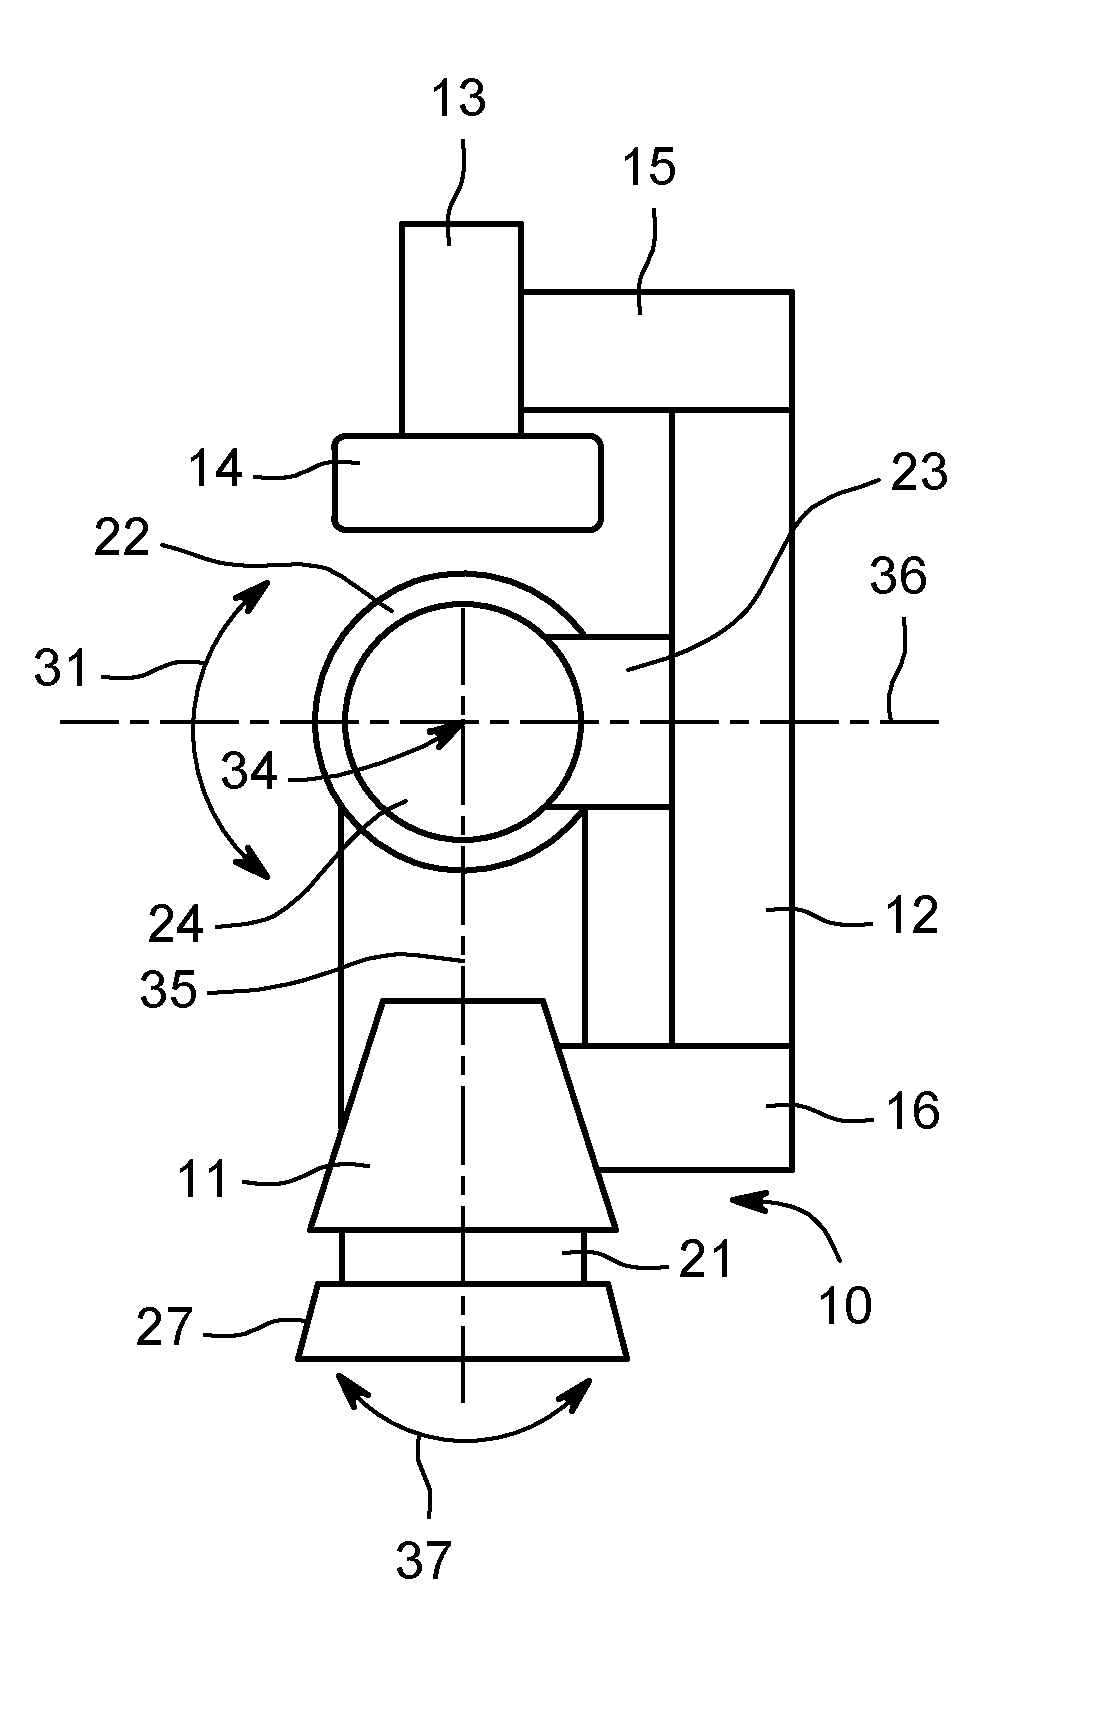 Supply device and method for a mobile imaging device